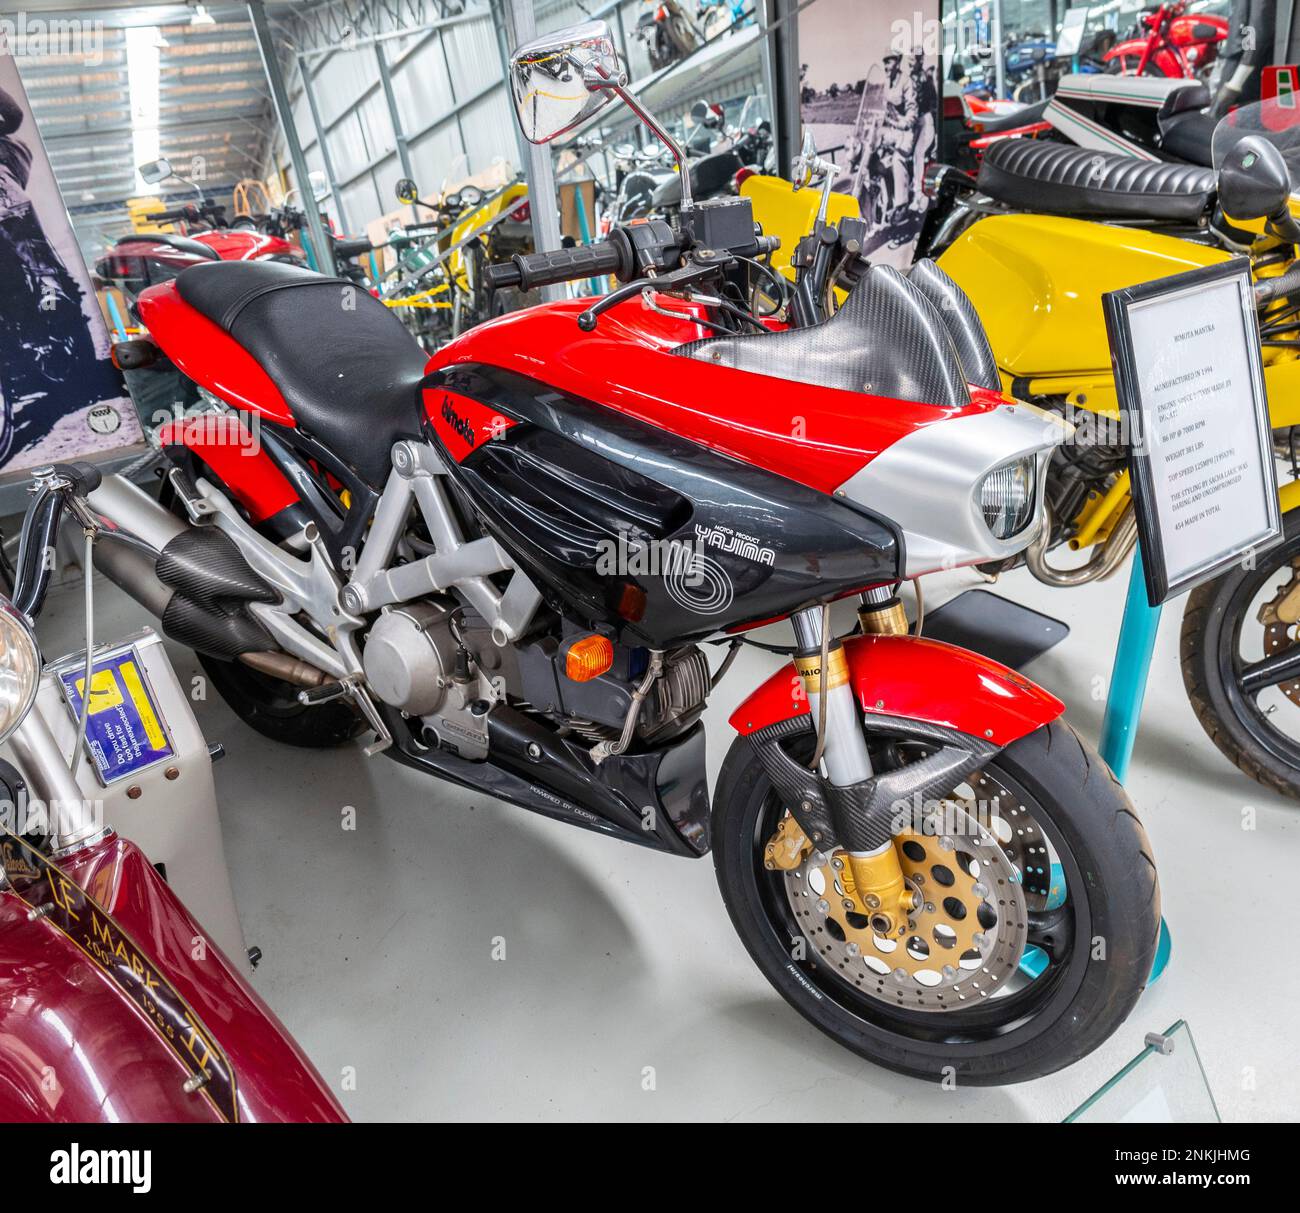 Bimota Mantra with ducati vee twin engine at the Inverell National Transport museum in northern new south wales, australia Stock Photo